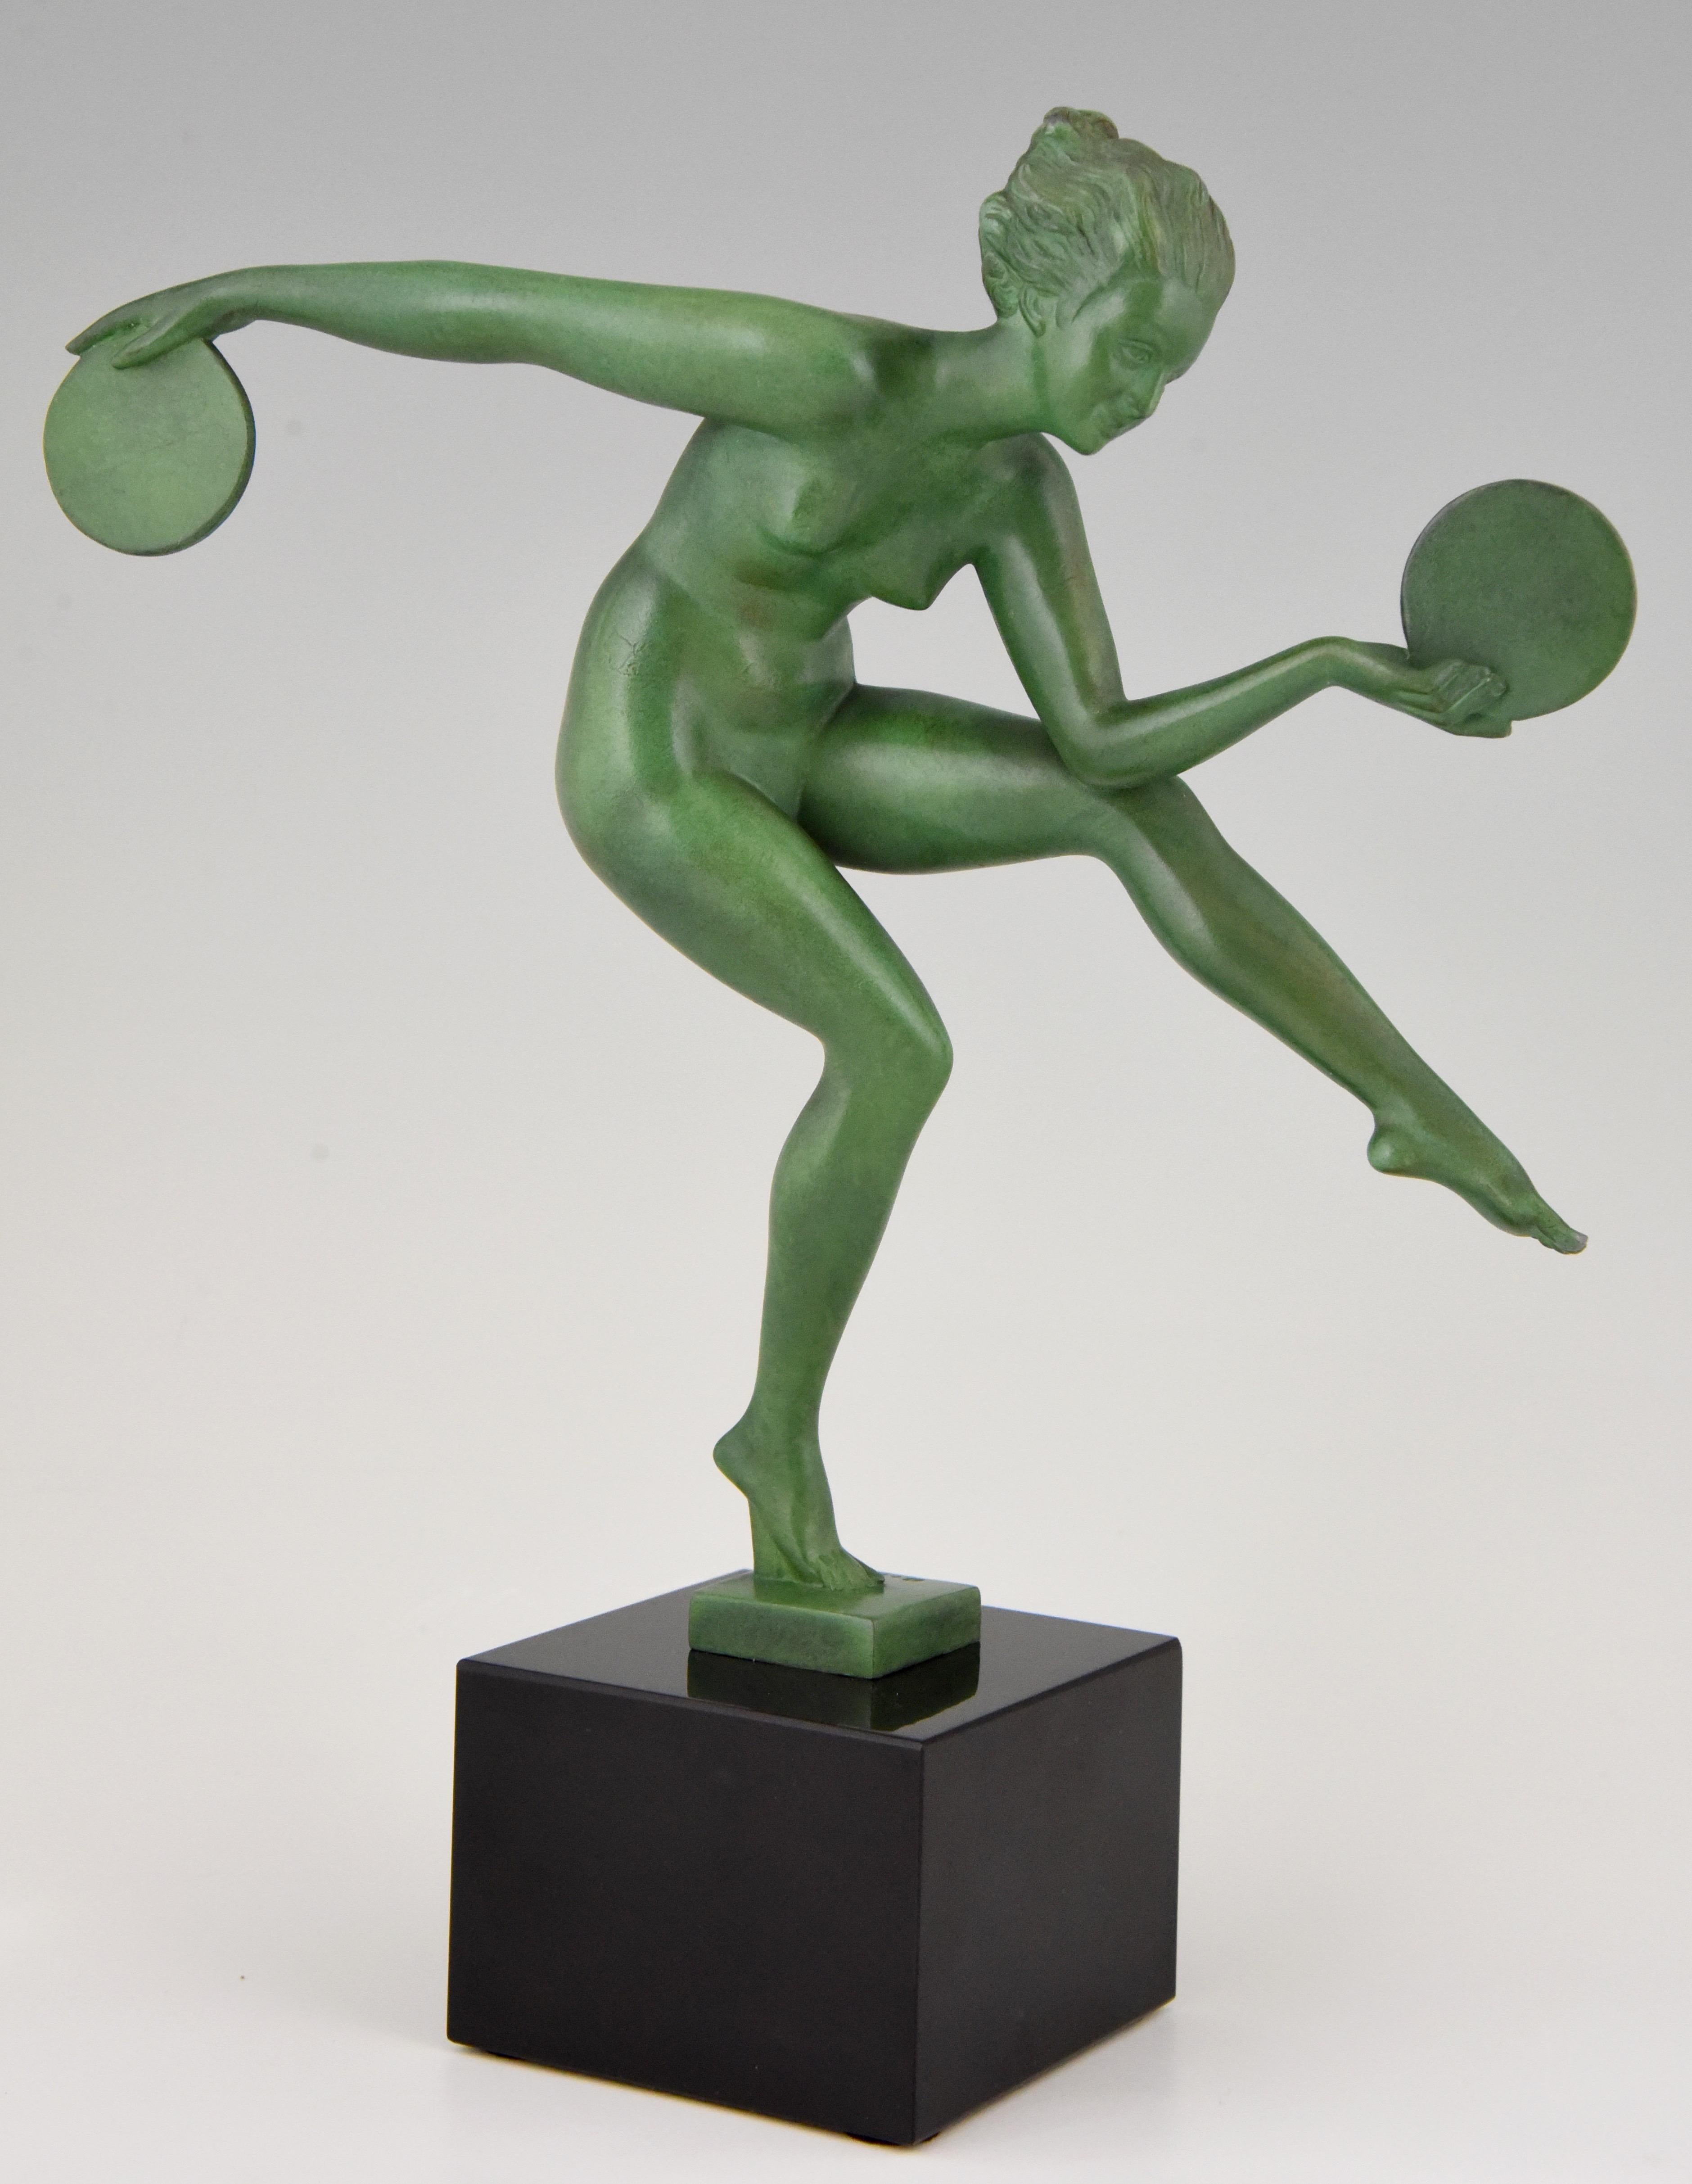 Lovely Art Deco sculpture of a dancing nude with discs. Signed Derenne, pseudonym used by Marcel Bouraine for his art metal sculptures cast by the Max Le Verrier foundry. Patianted art metal on a Belgian black marble base. France, 1930.